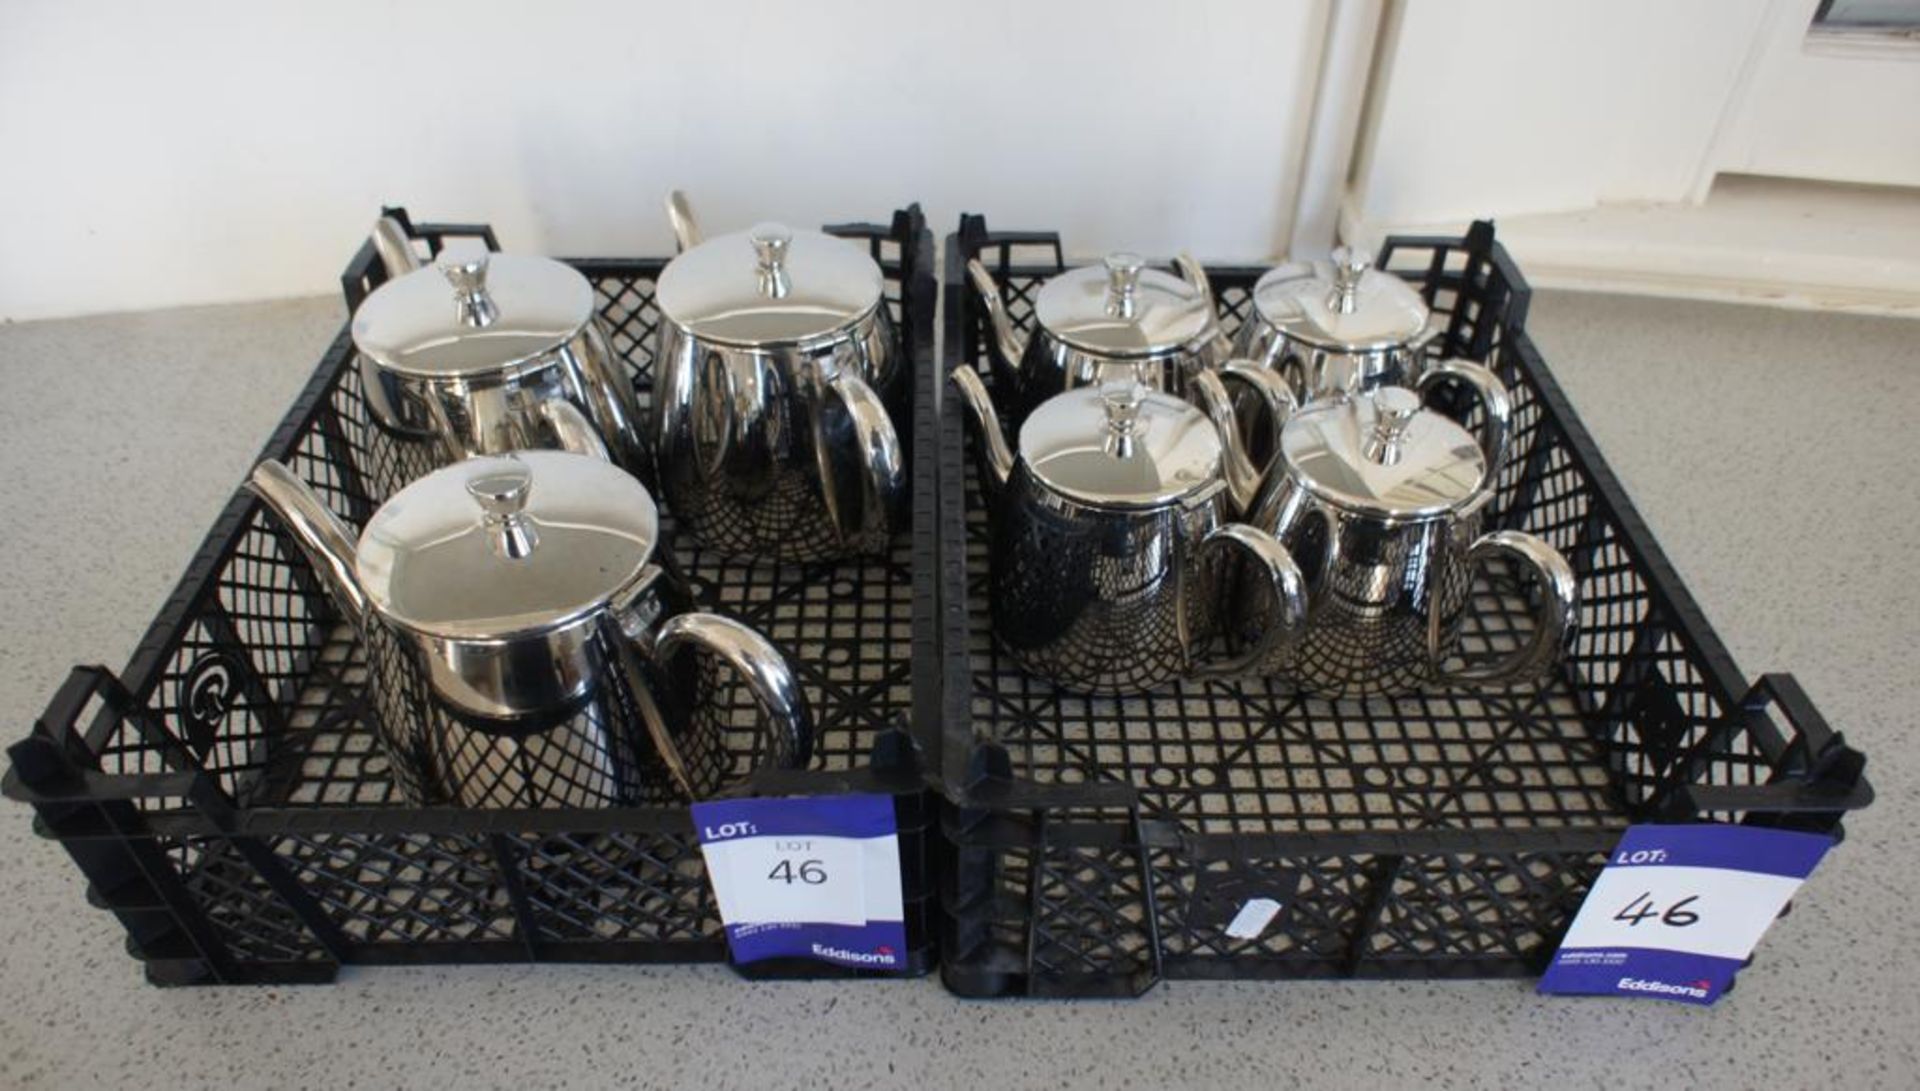 3 Large Stainless Steel Teapots, 4 Small Stainless Steel Teapots